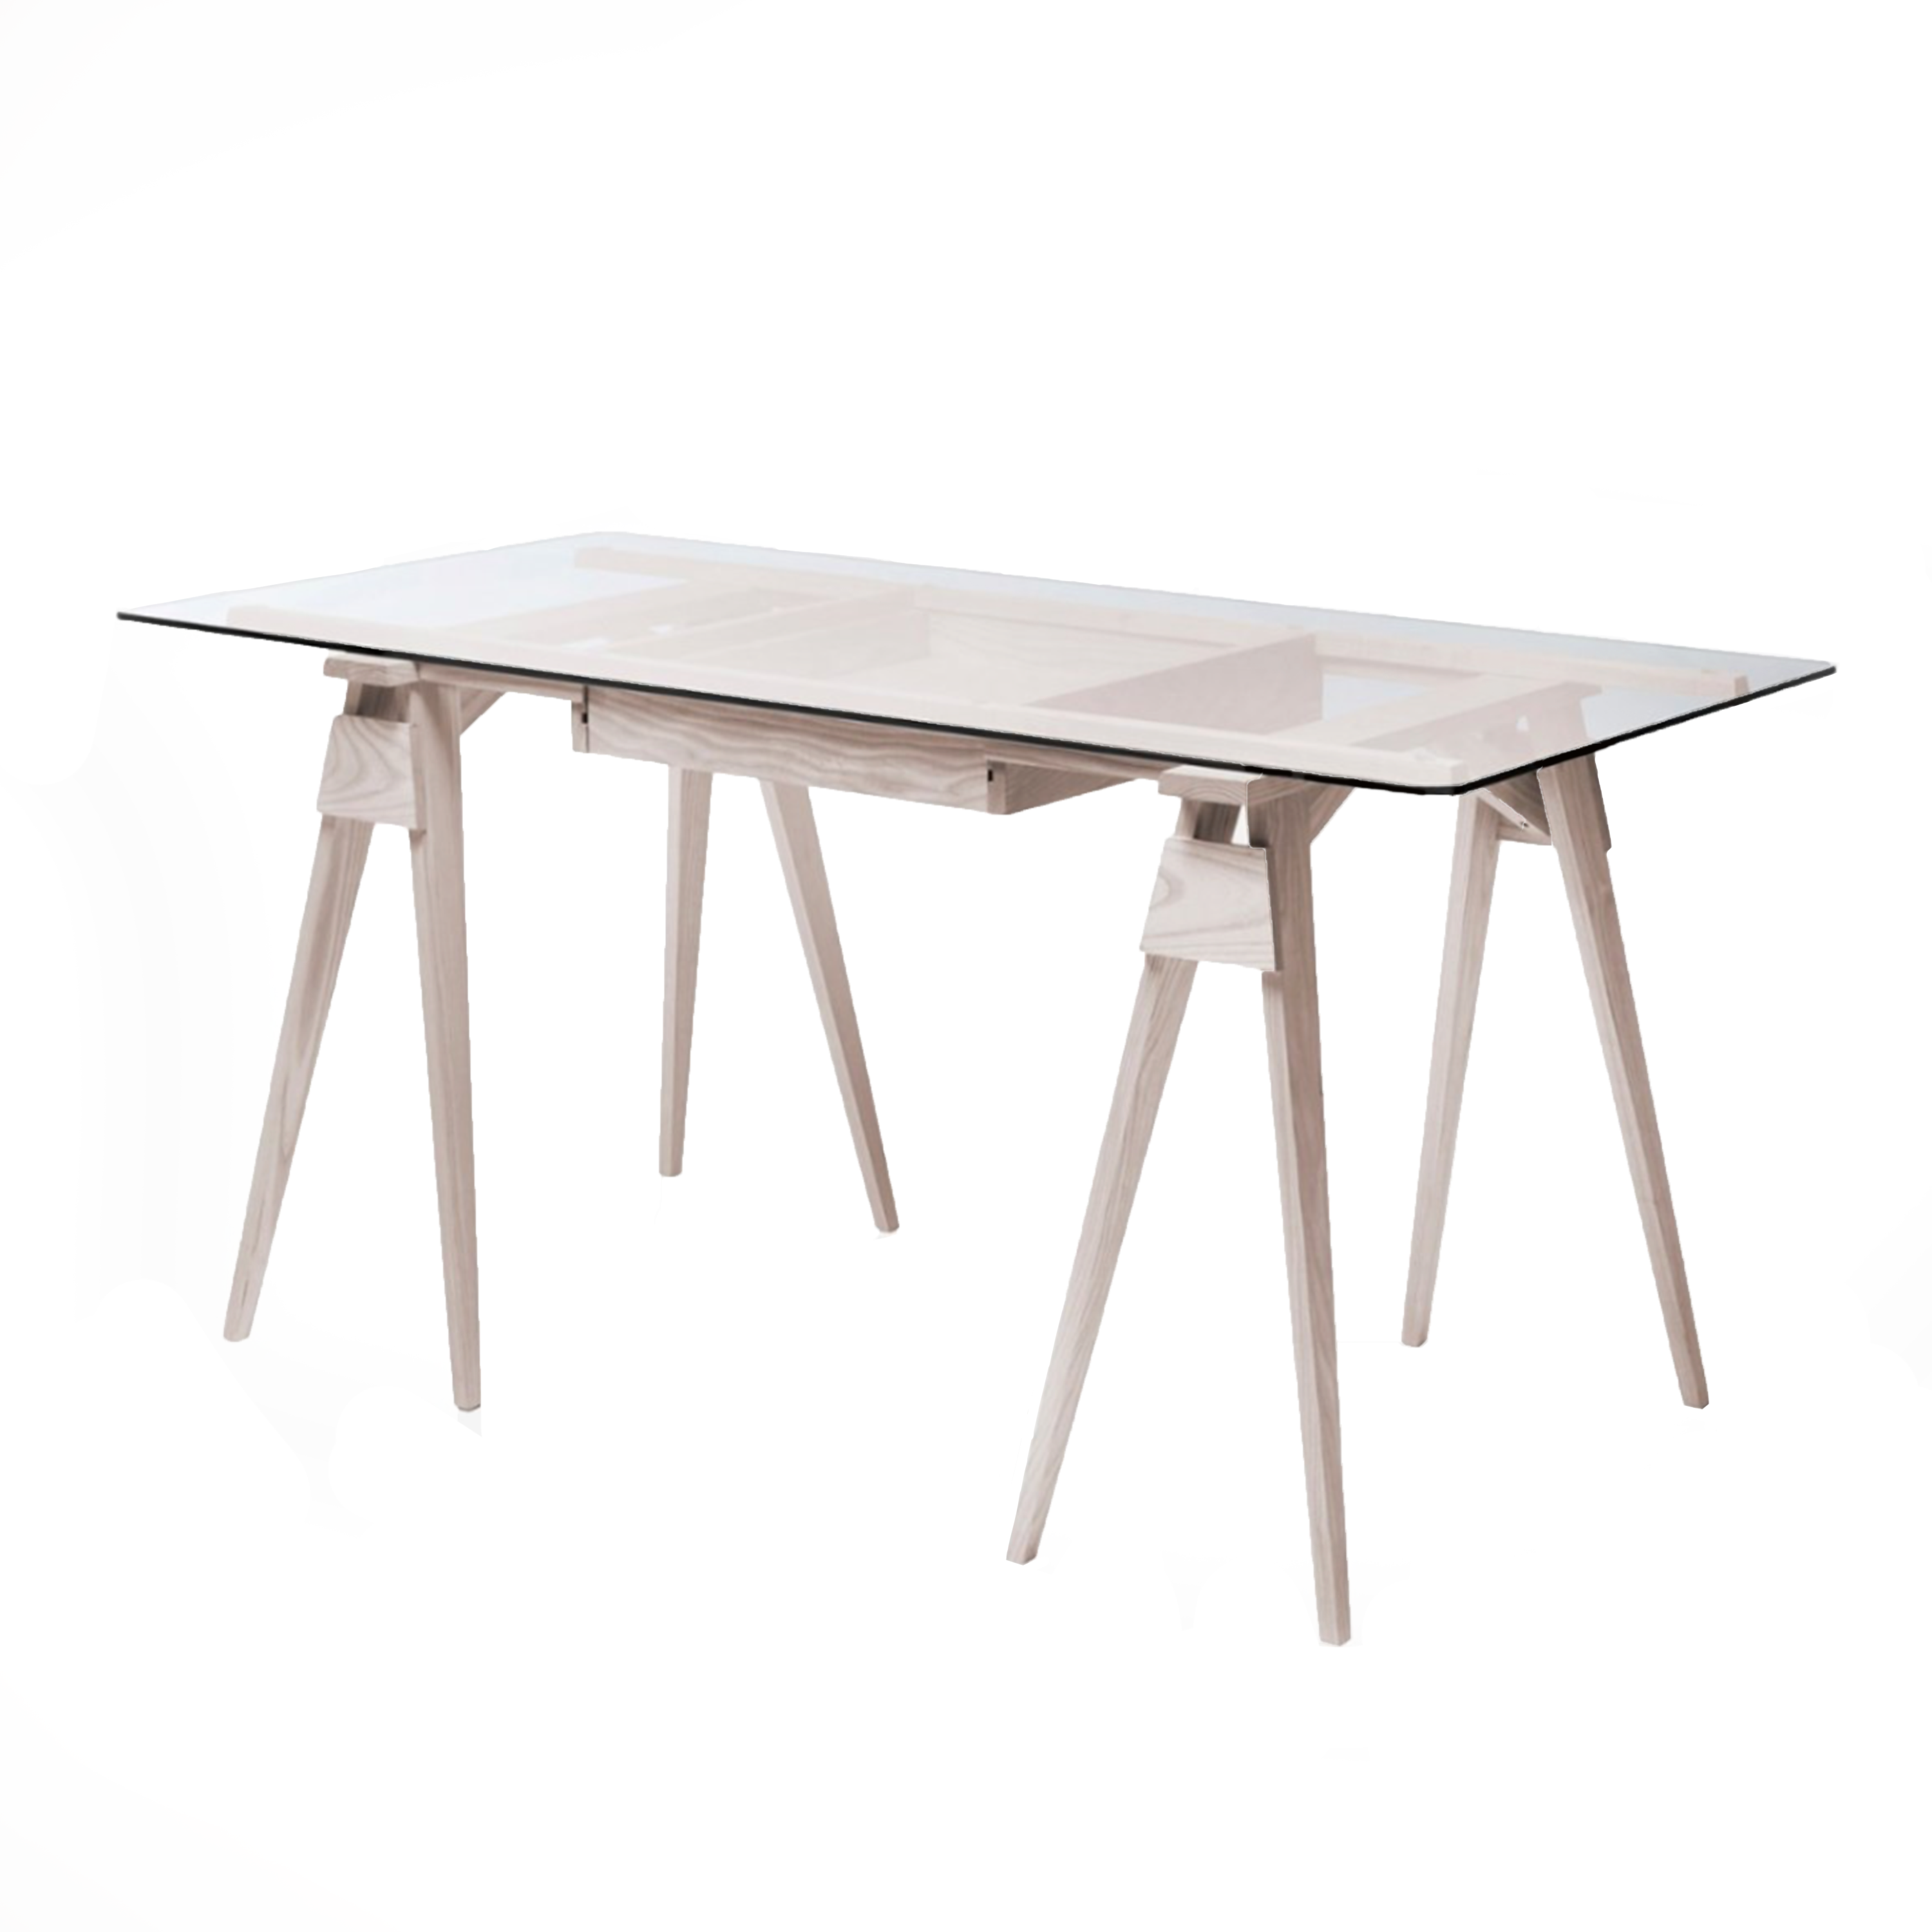 Warehouse Home and Design House Stockholm Glass top Arco Desk In Oak for sale